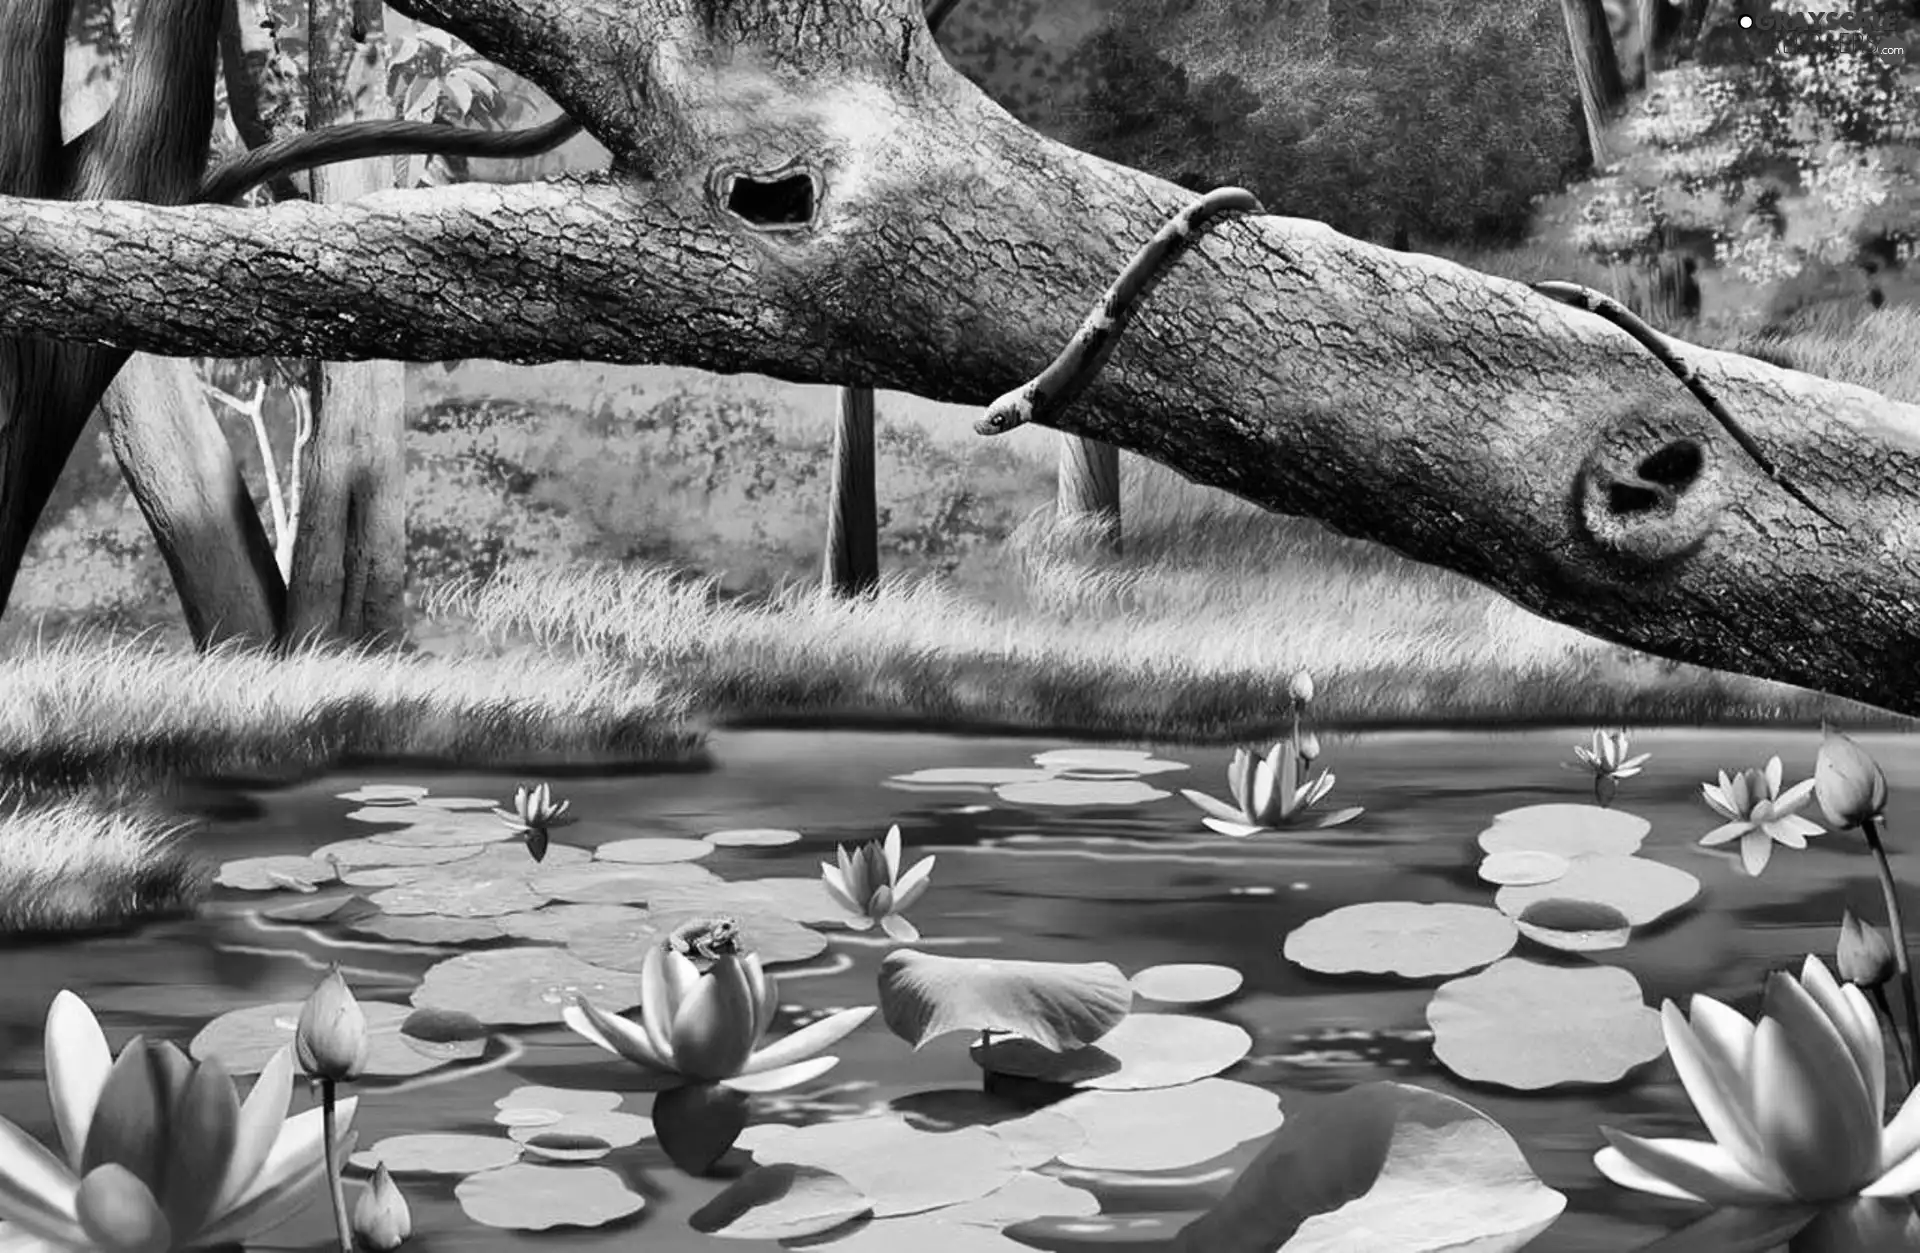 lilies, Snake, trees